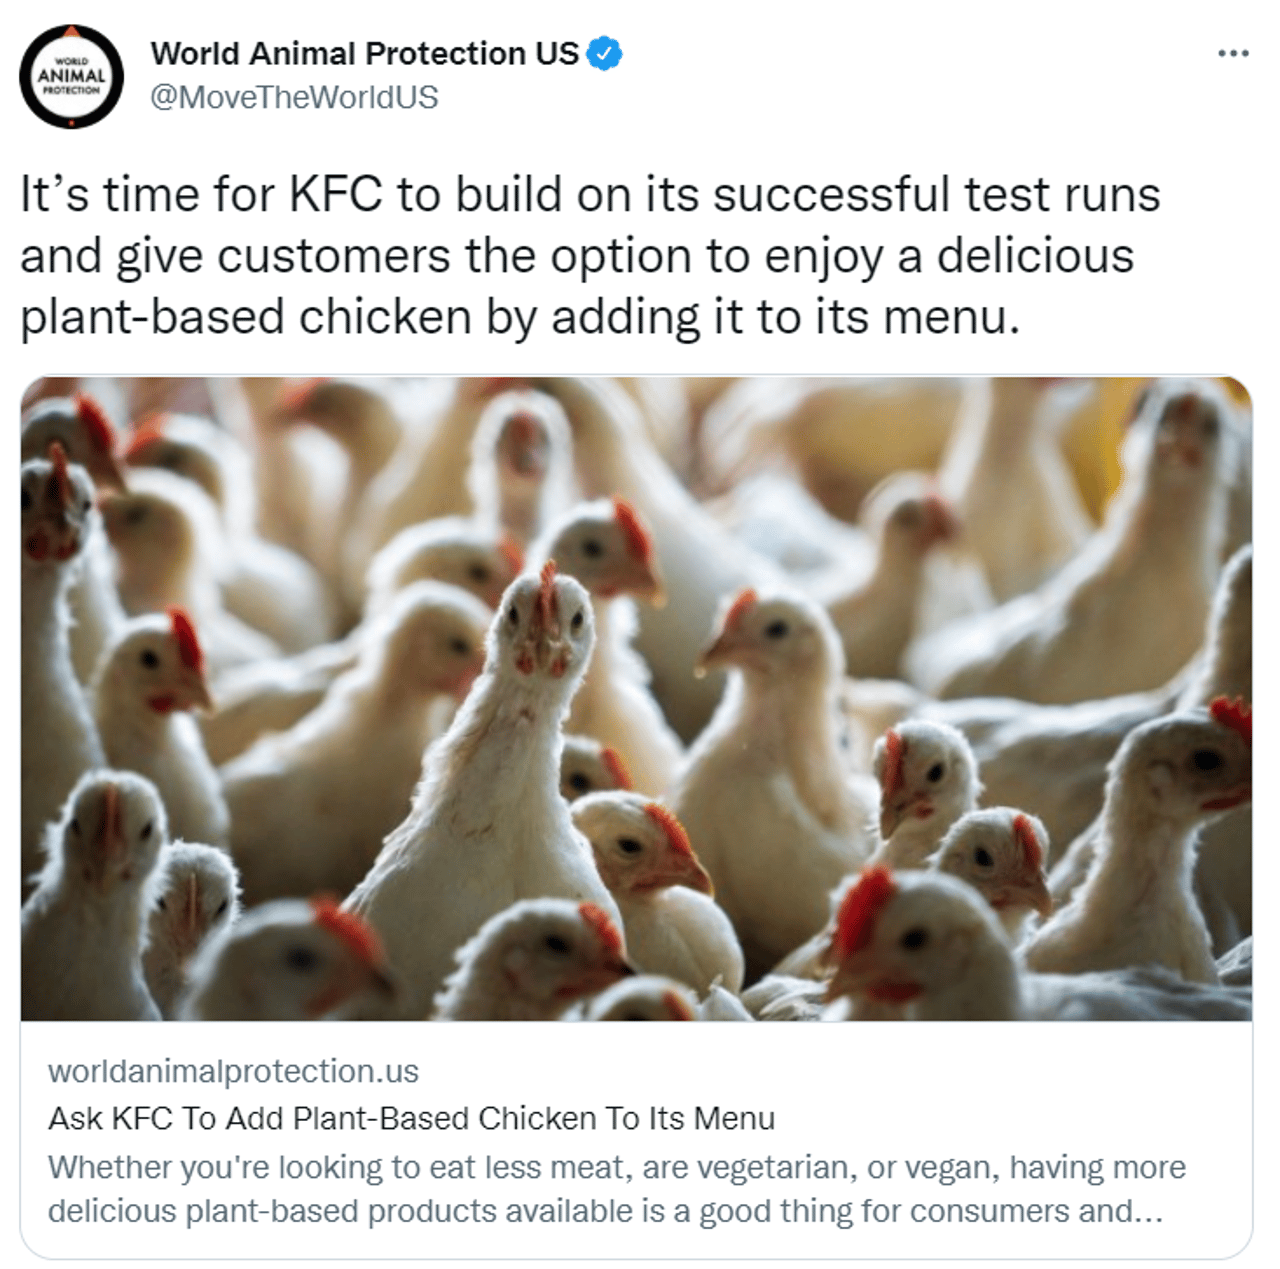 Tweet from World Animal Protection urging KFC to have a plant based option.